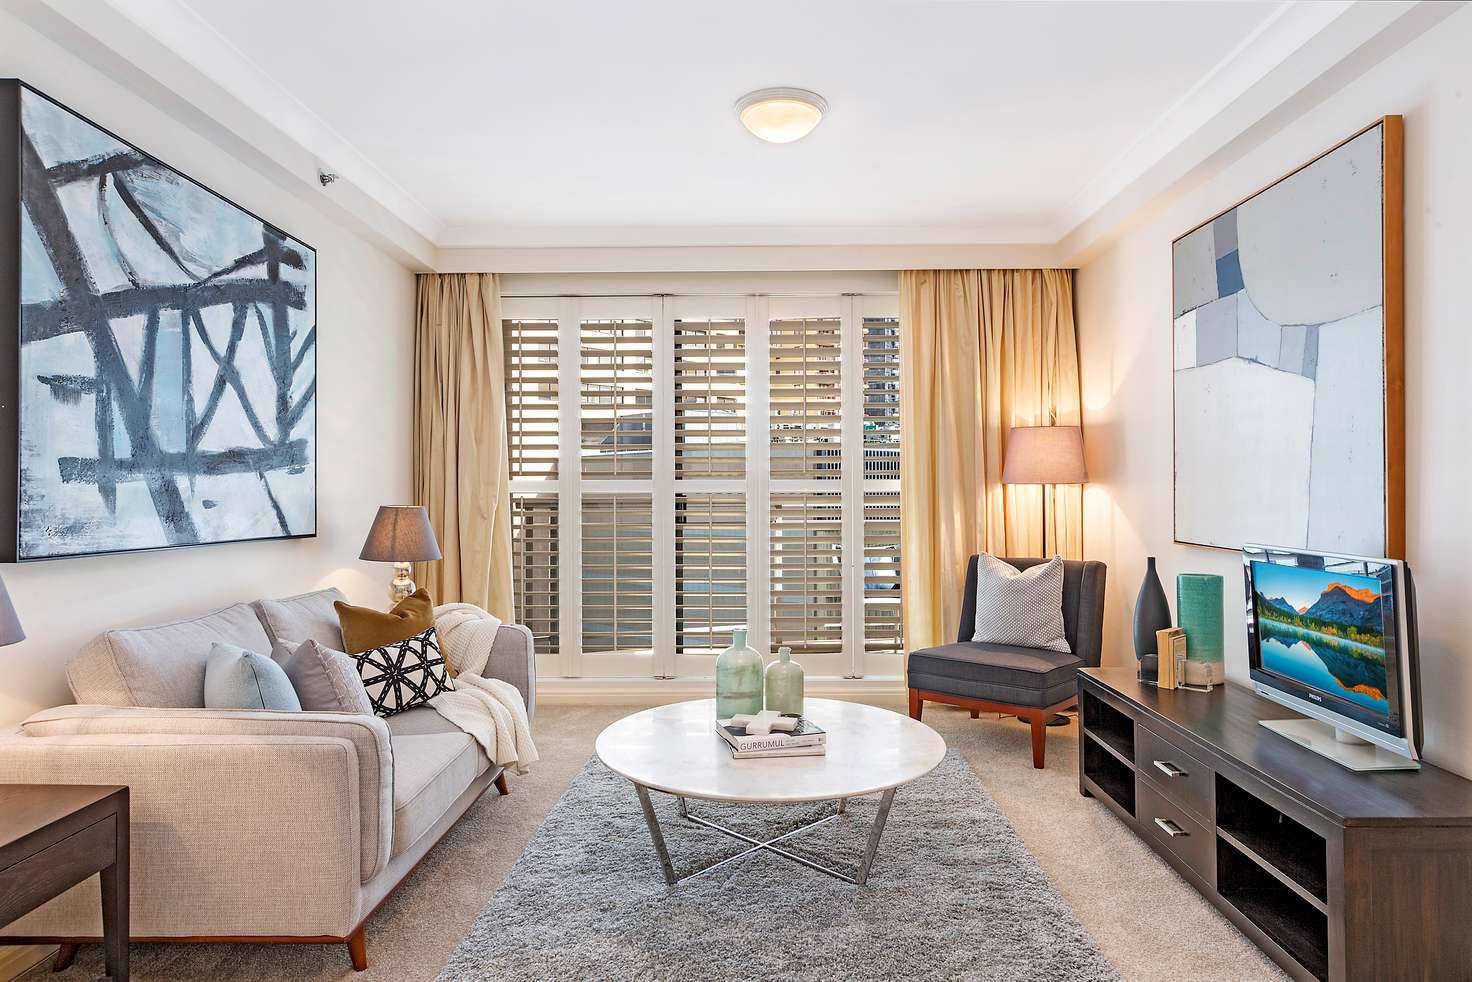 Main view of Homely apartment listing, 281 Elizabeth Street, Sydney NSW 2000